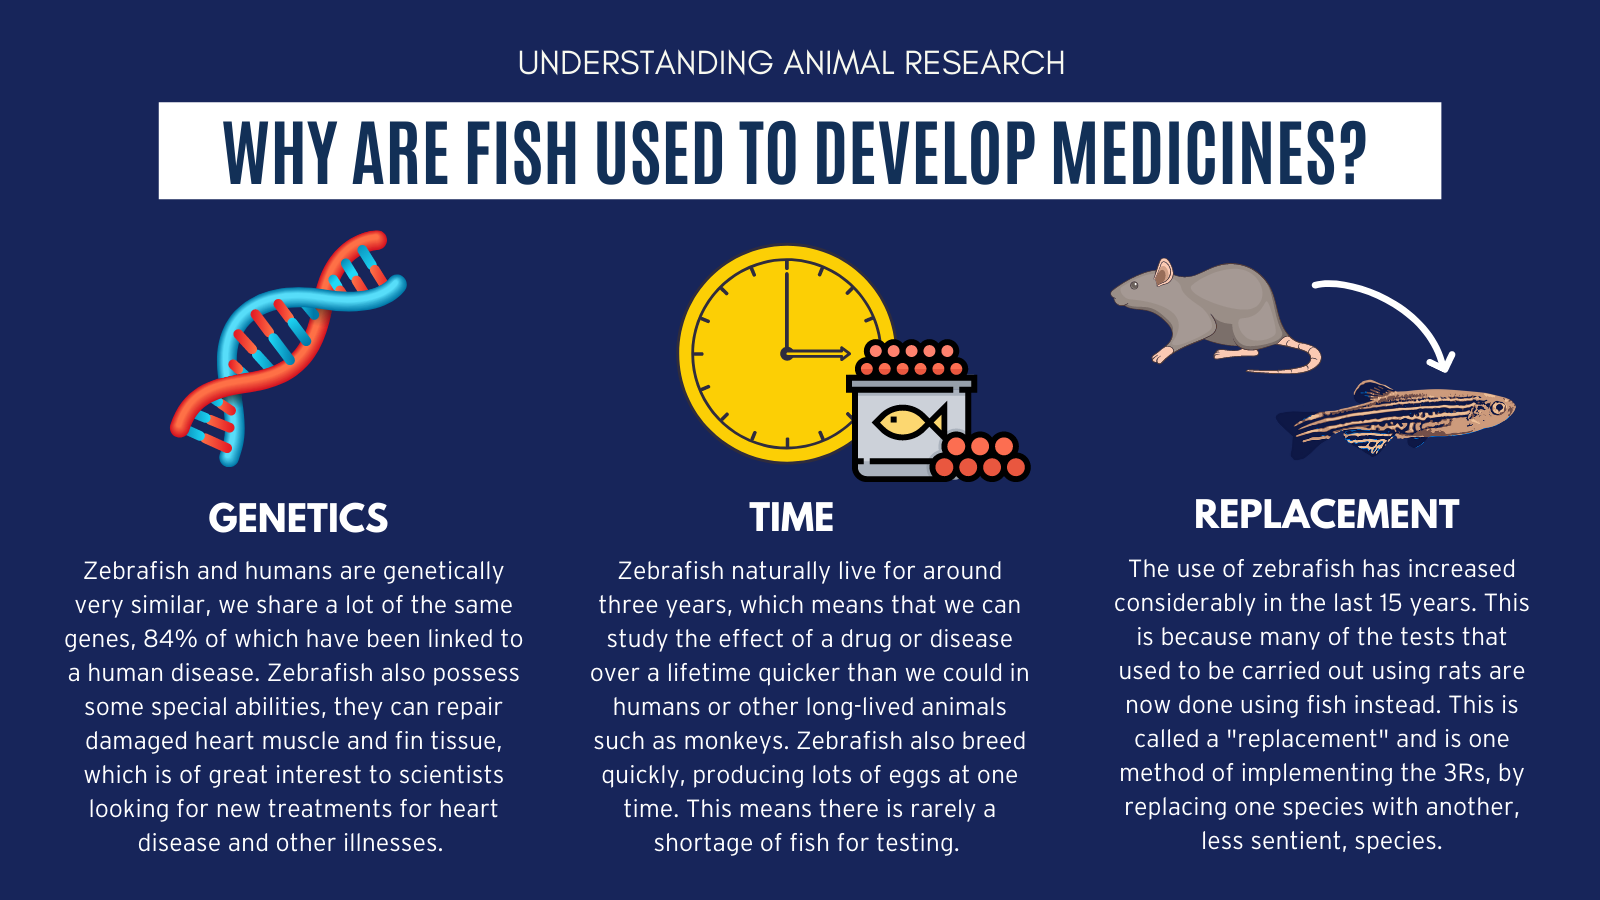 Why are fish used to develop medicines?